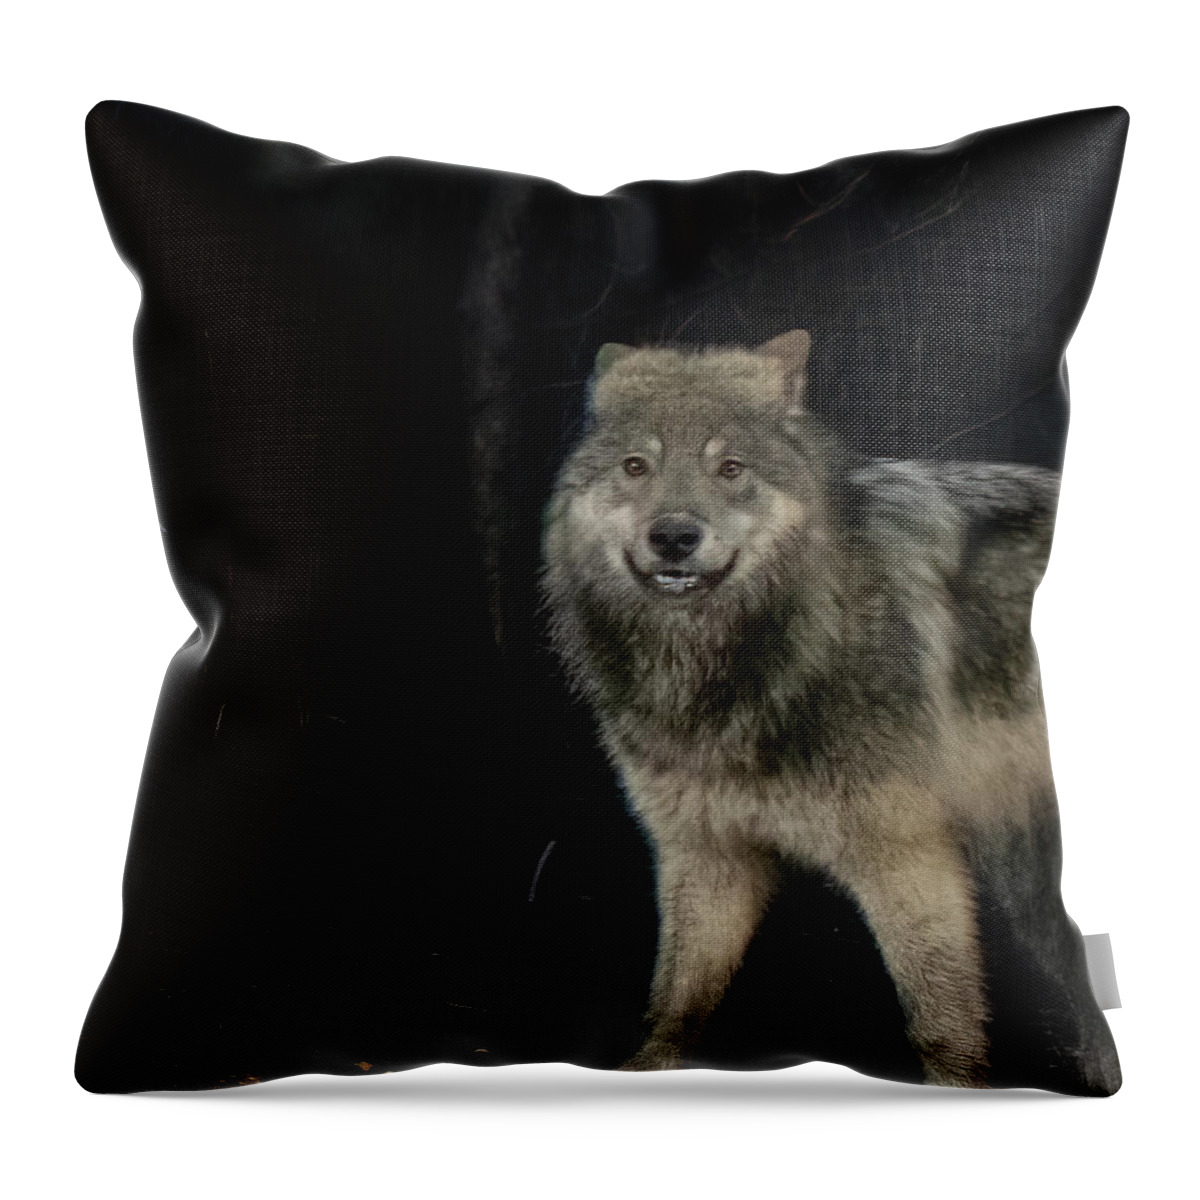 Wolf Throw Pillow featuring the photograph Smiley the Friendliest Lassen Pack Wolf by Randy Robbins